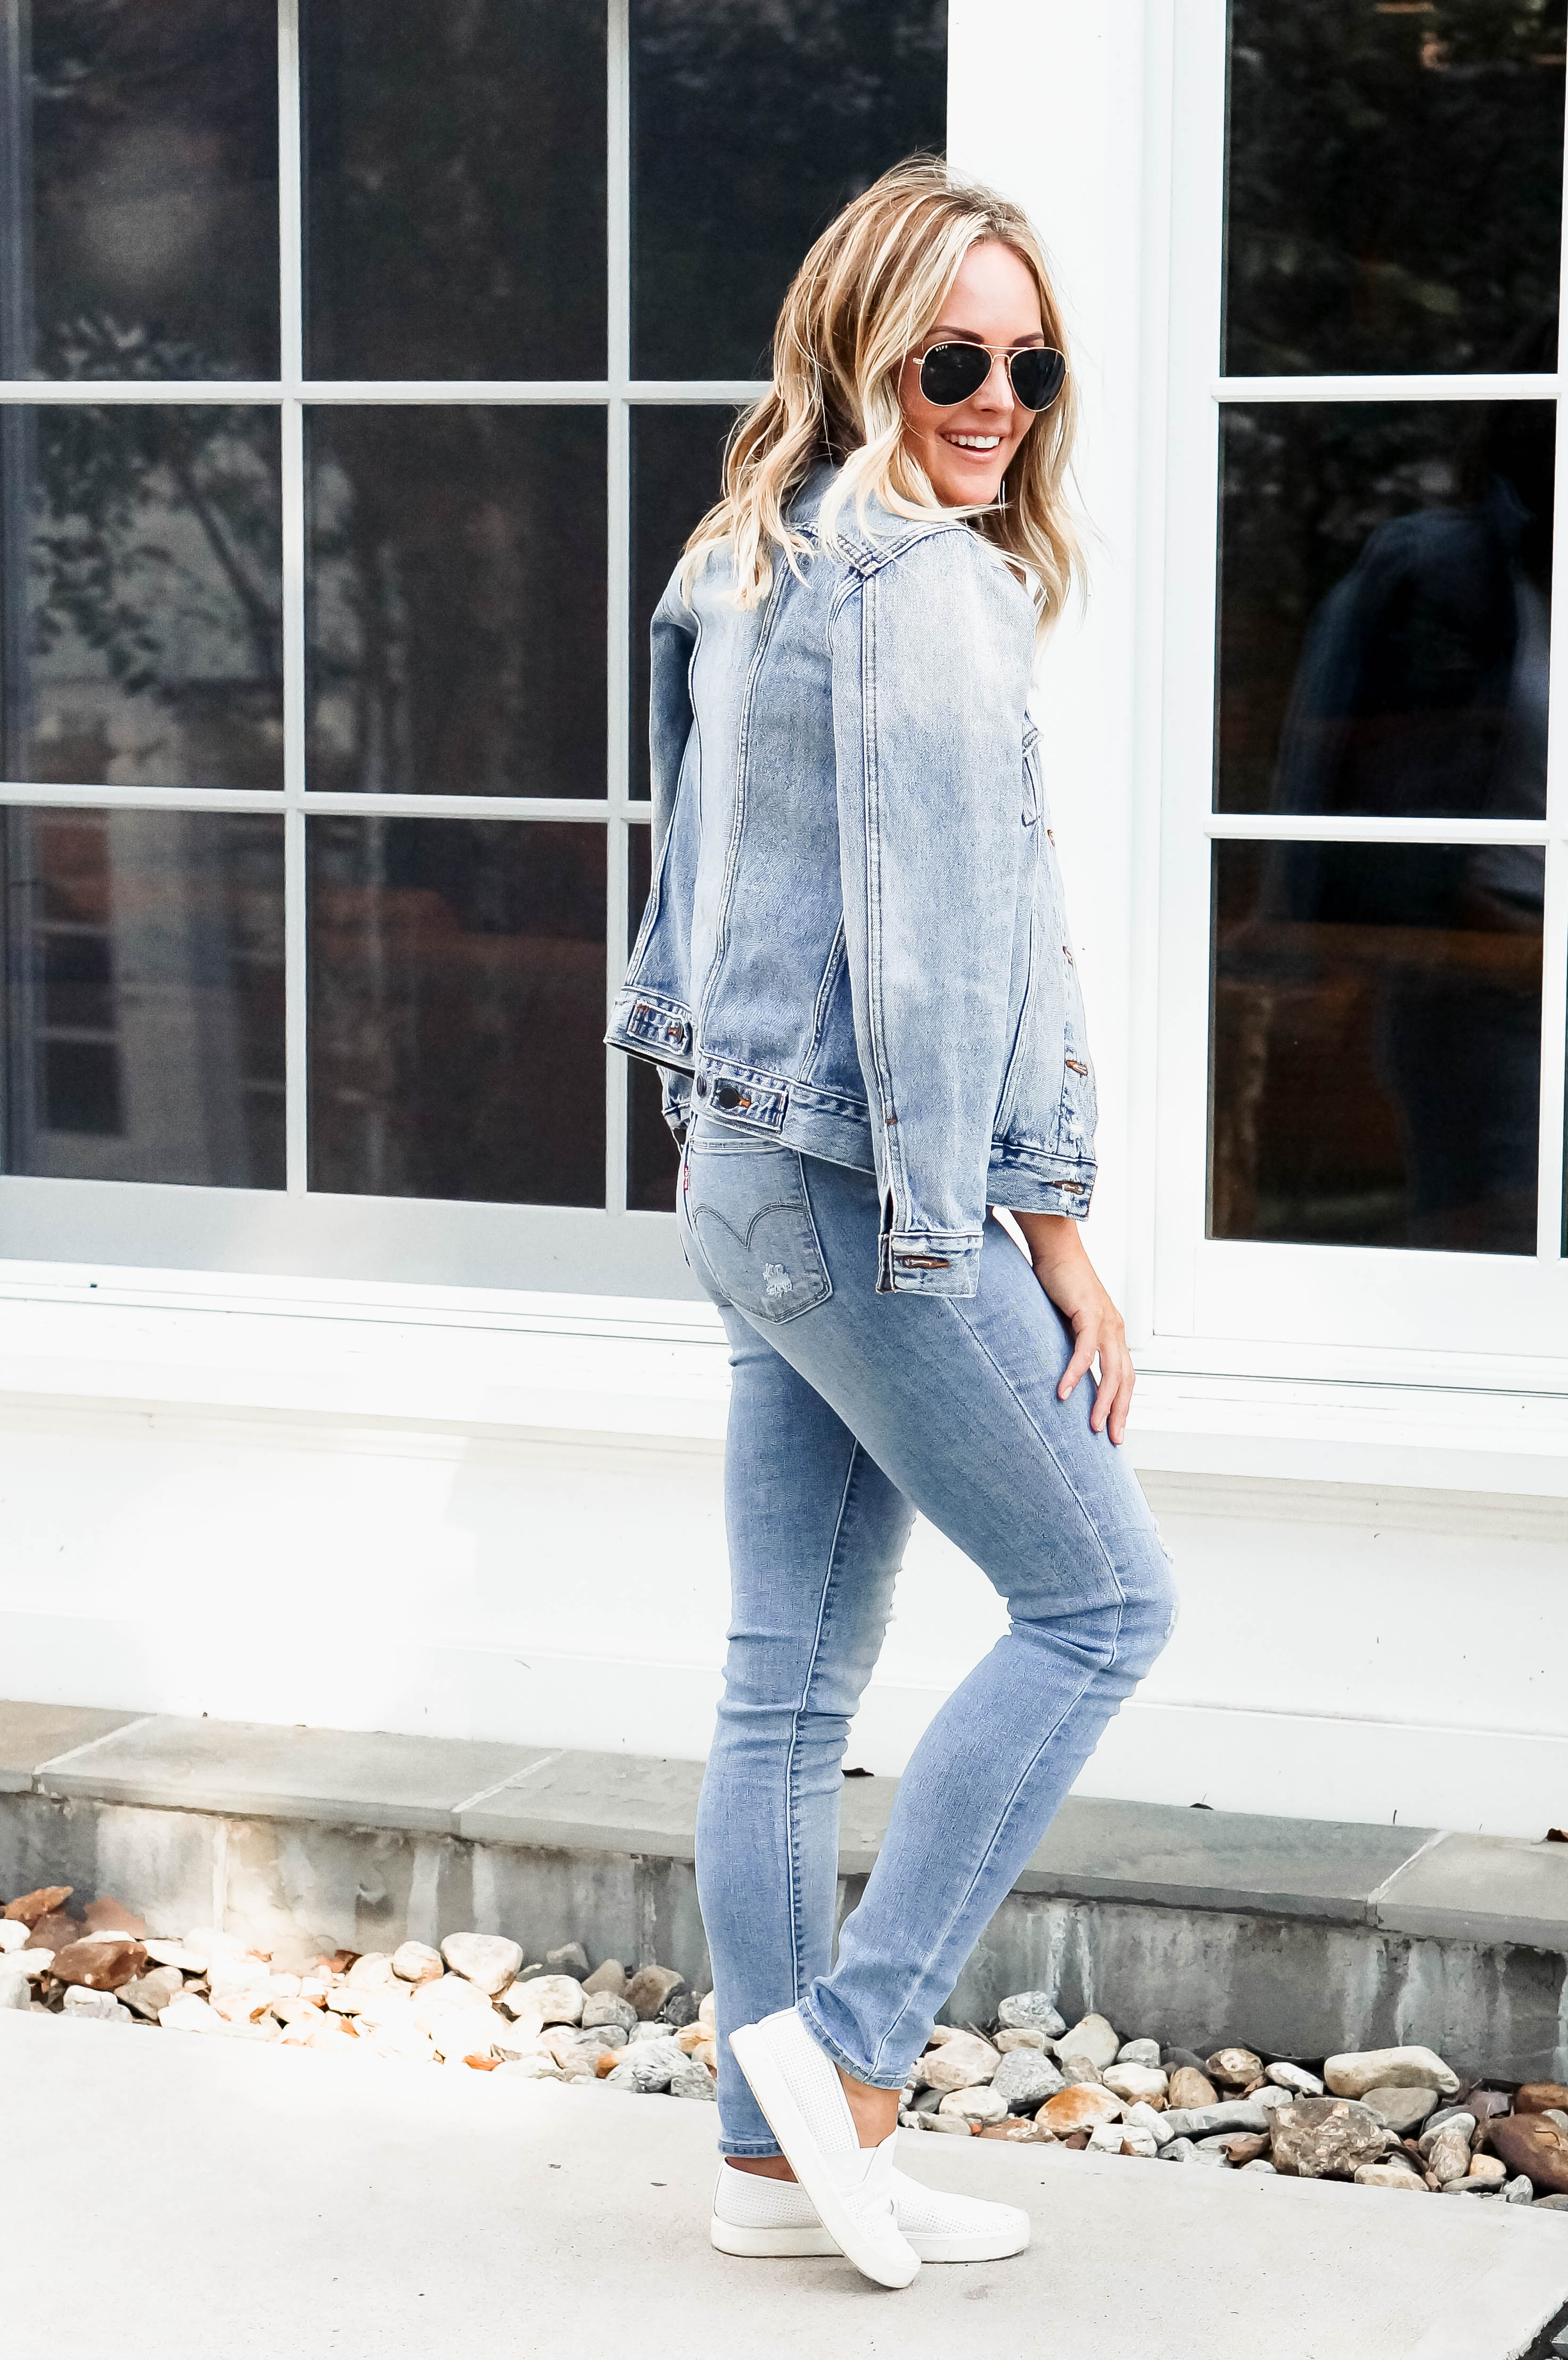 Everyday Trends For Fall With Levi's Denim on Denim